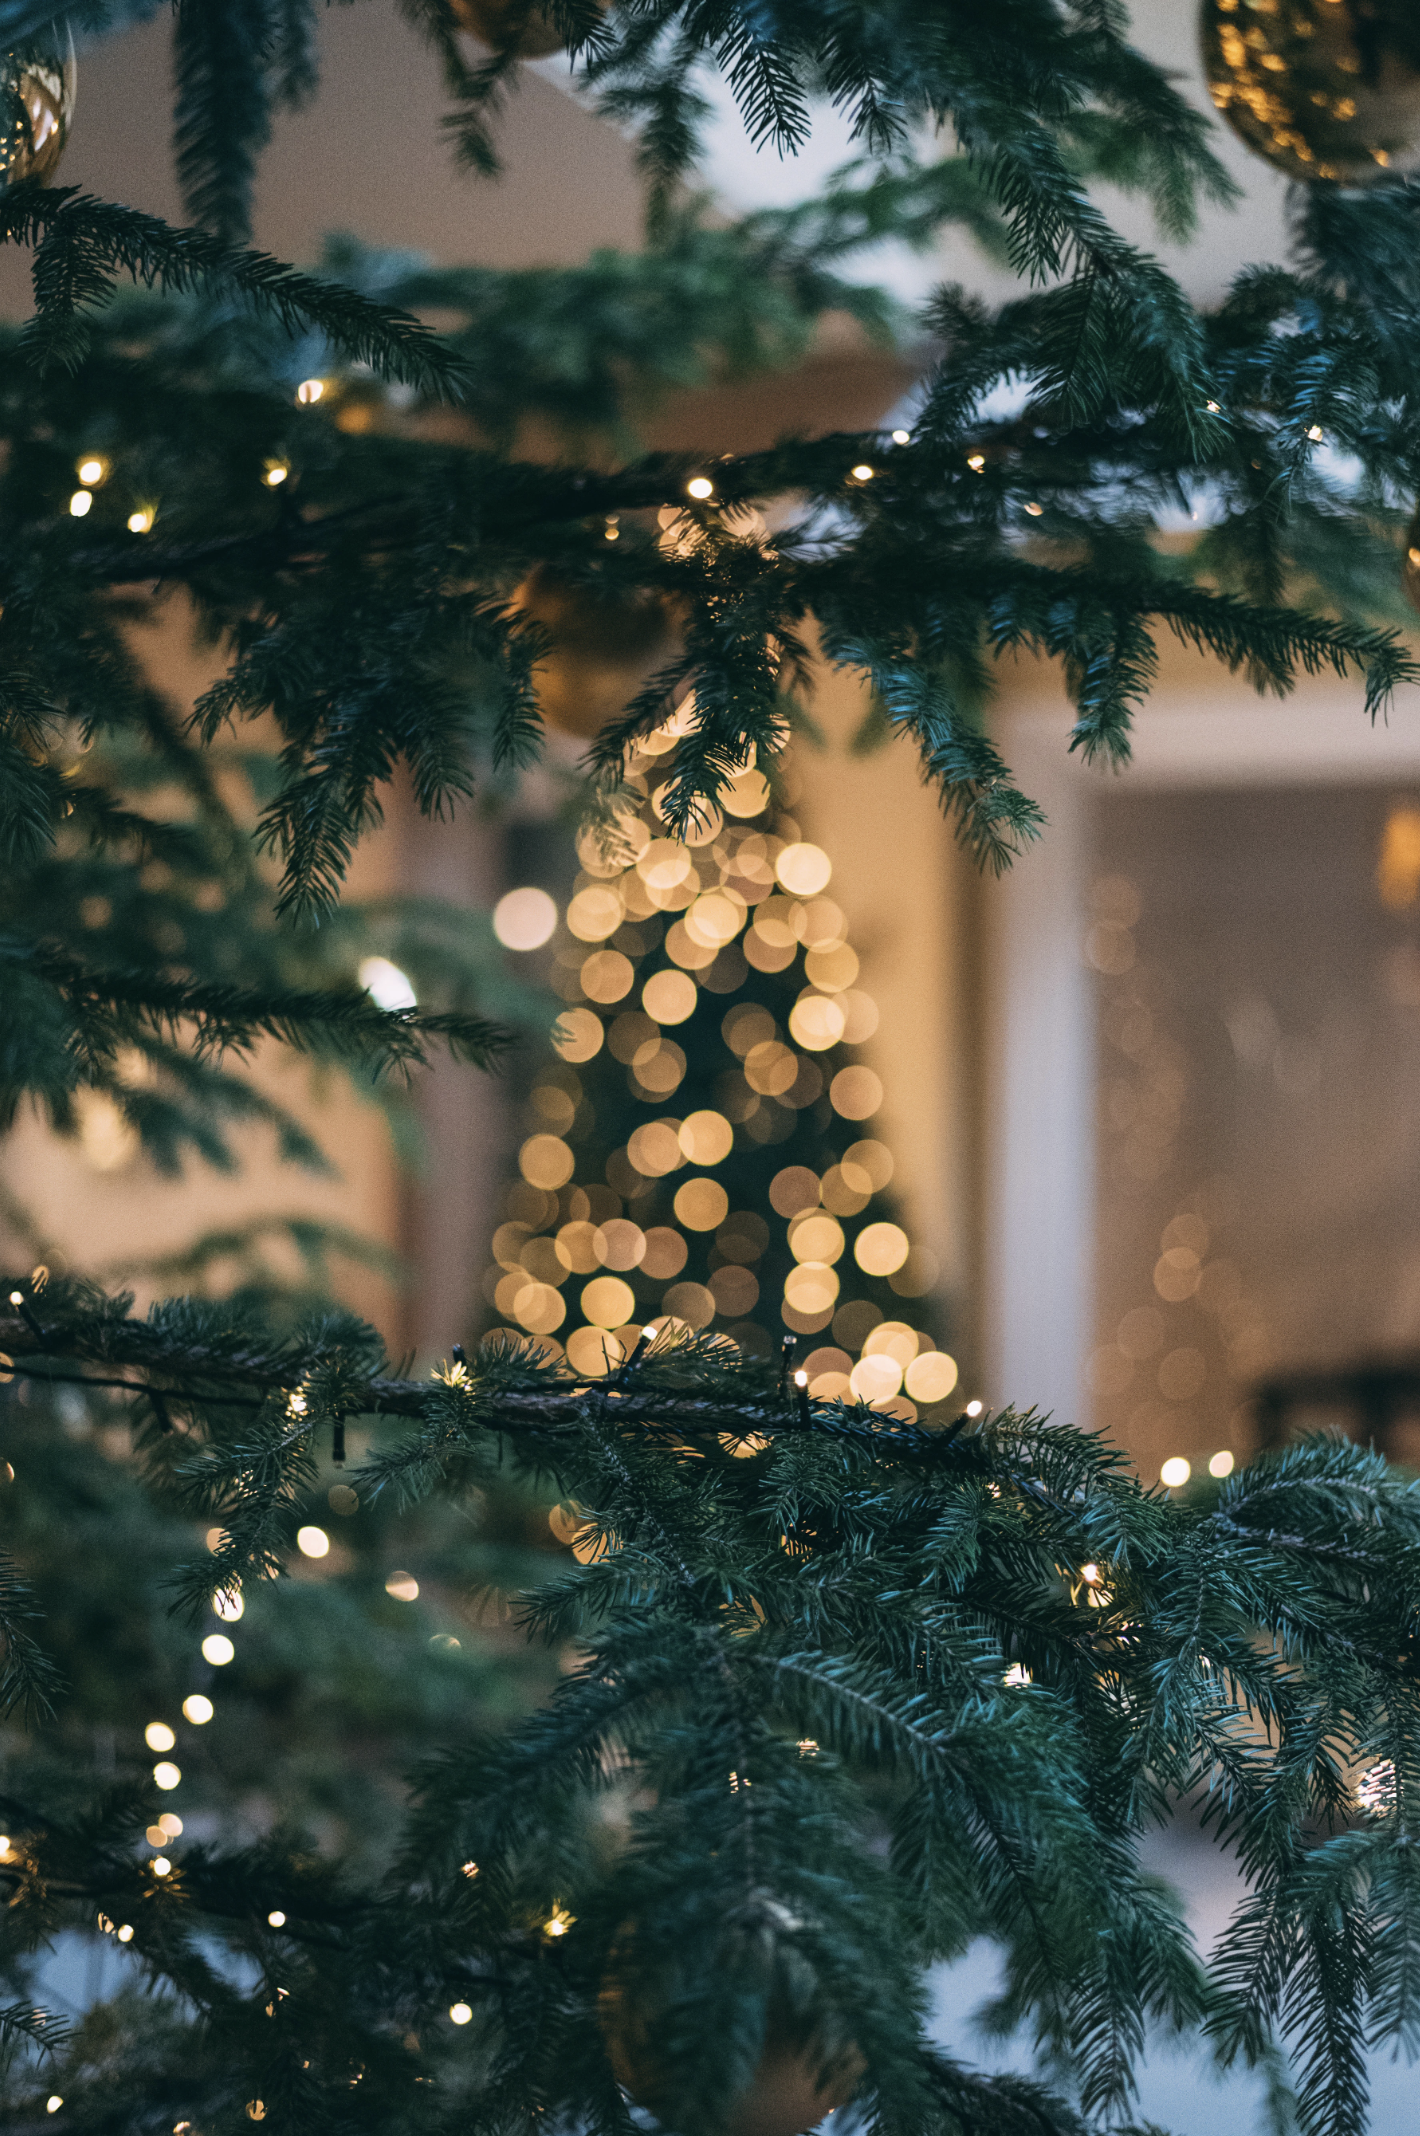 Natural vs. Artificial: Which Christmas Tree Option is Better for the Climate?